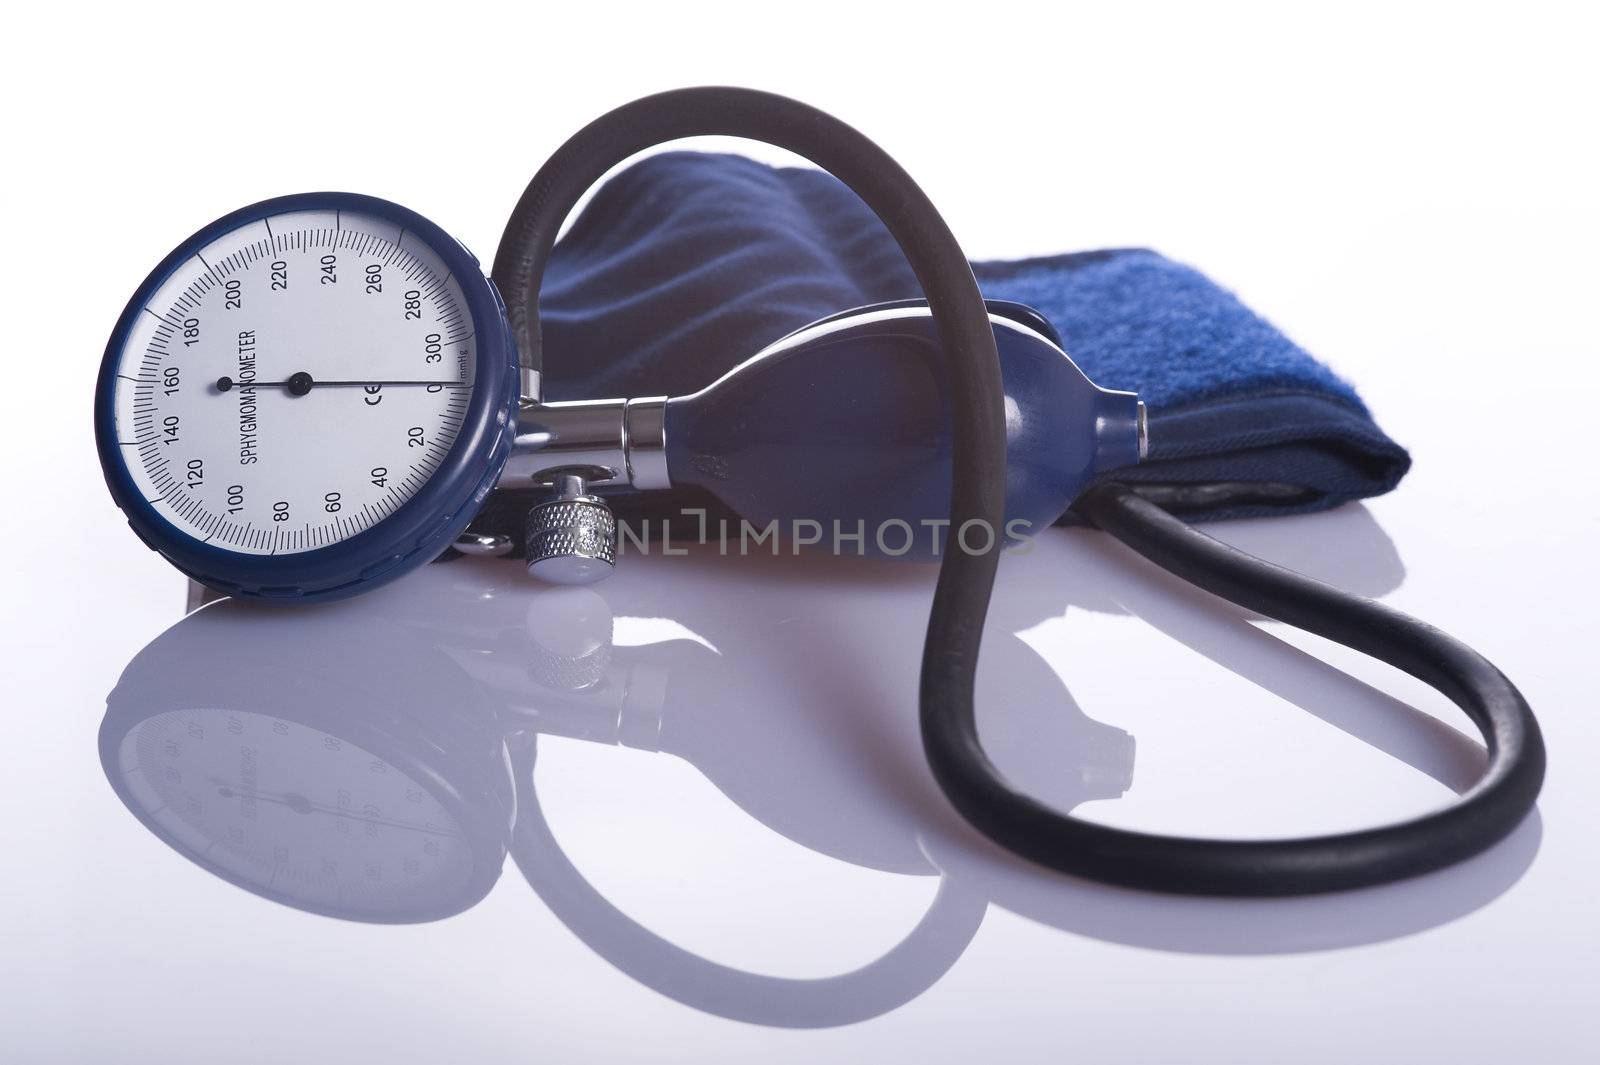 device used to measure blood pressure isolated on white background